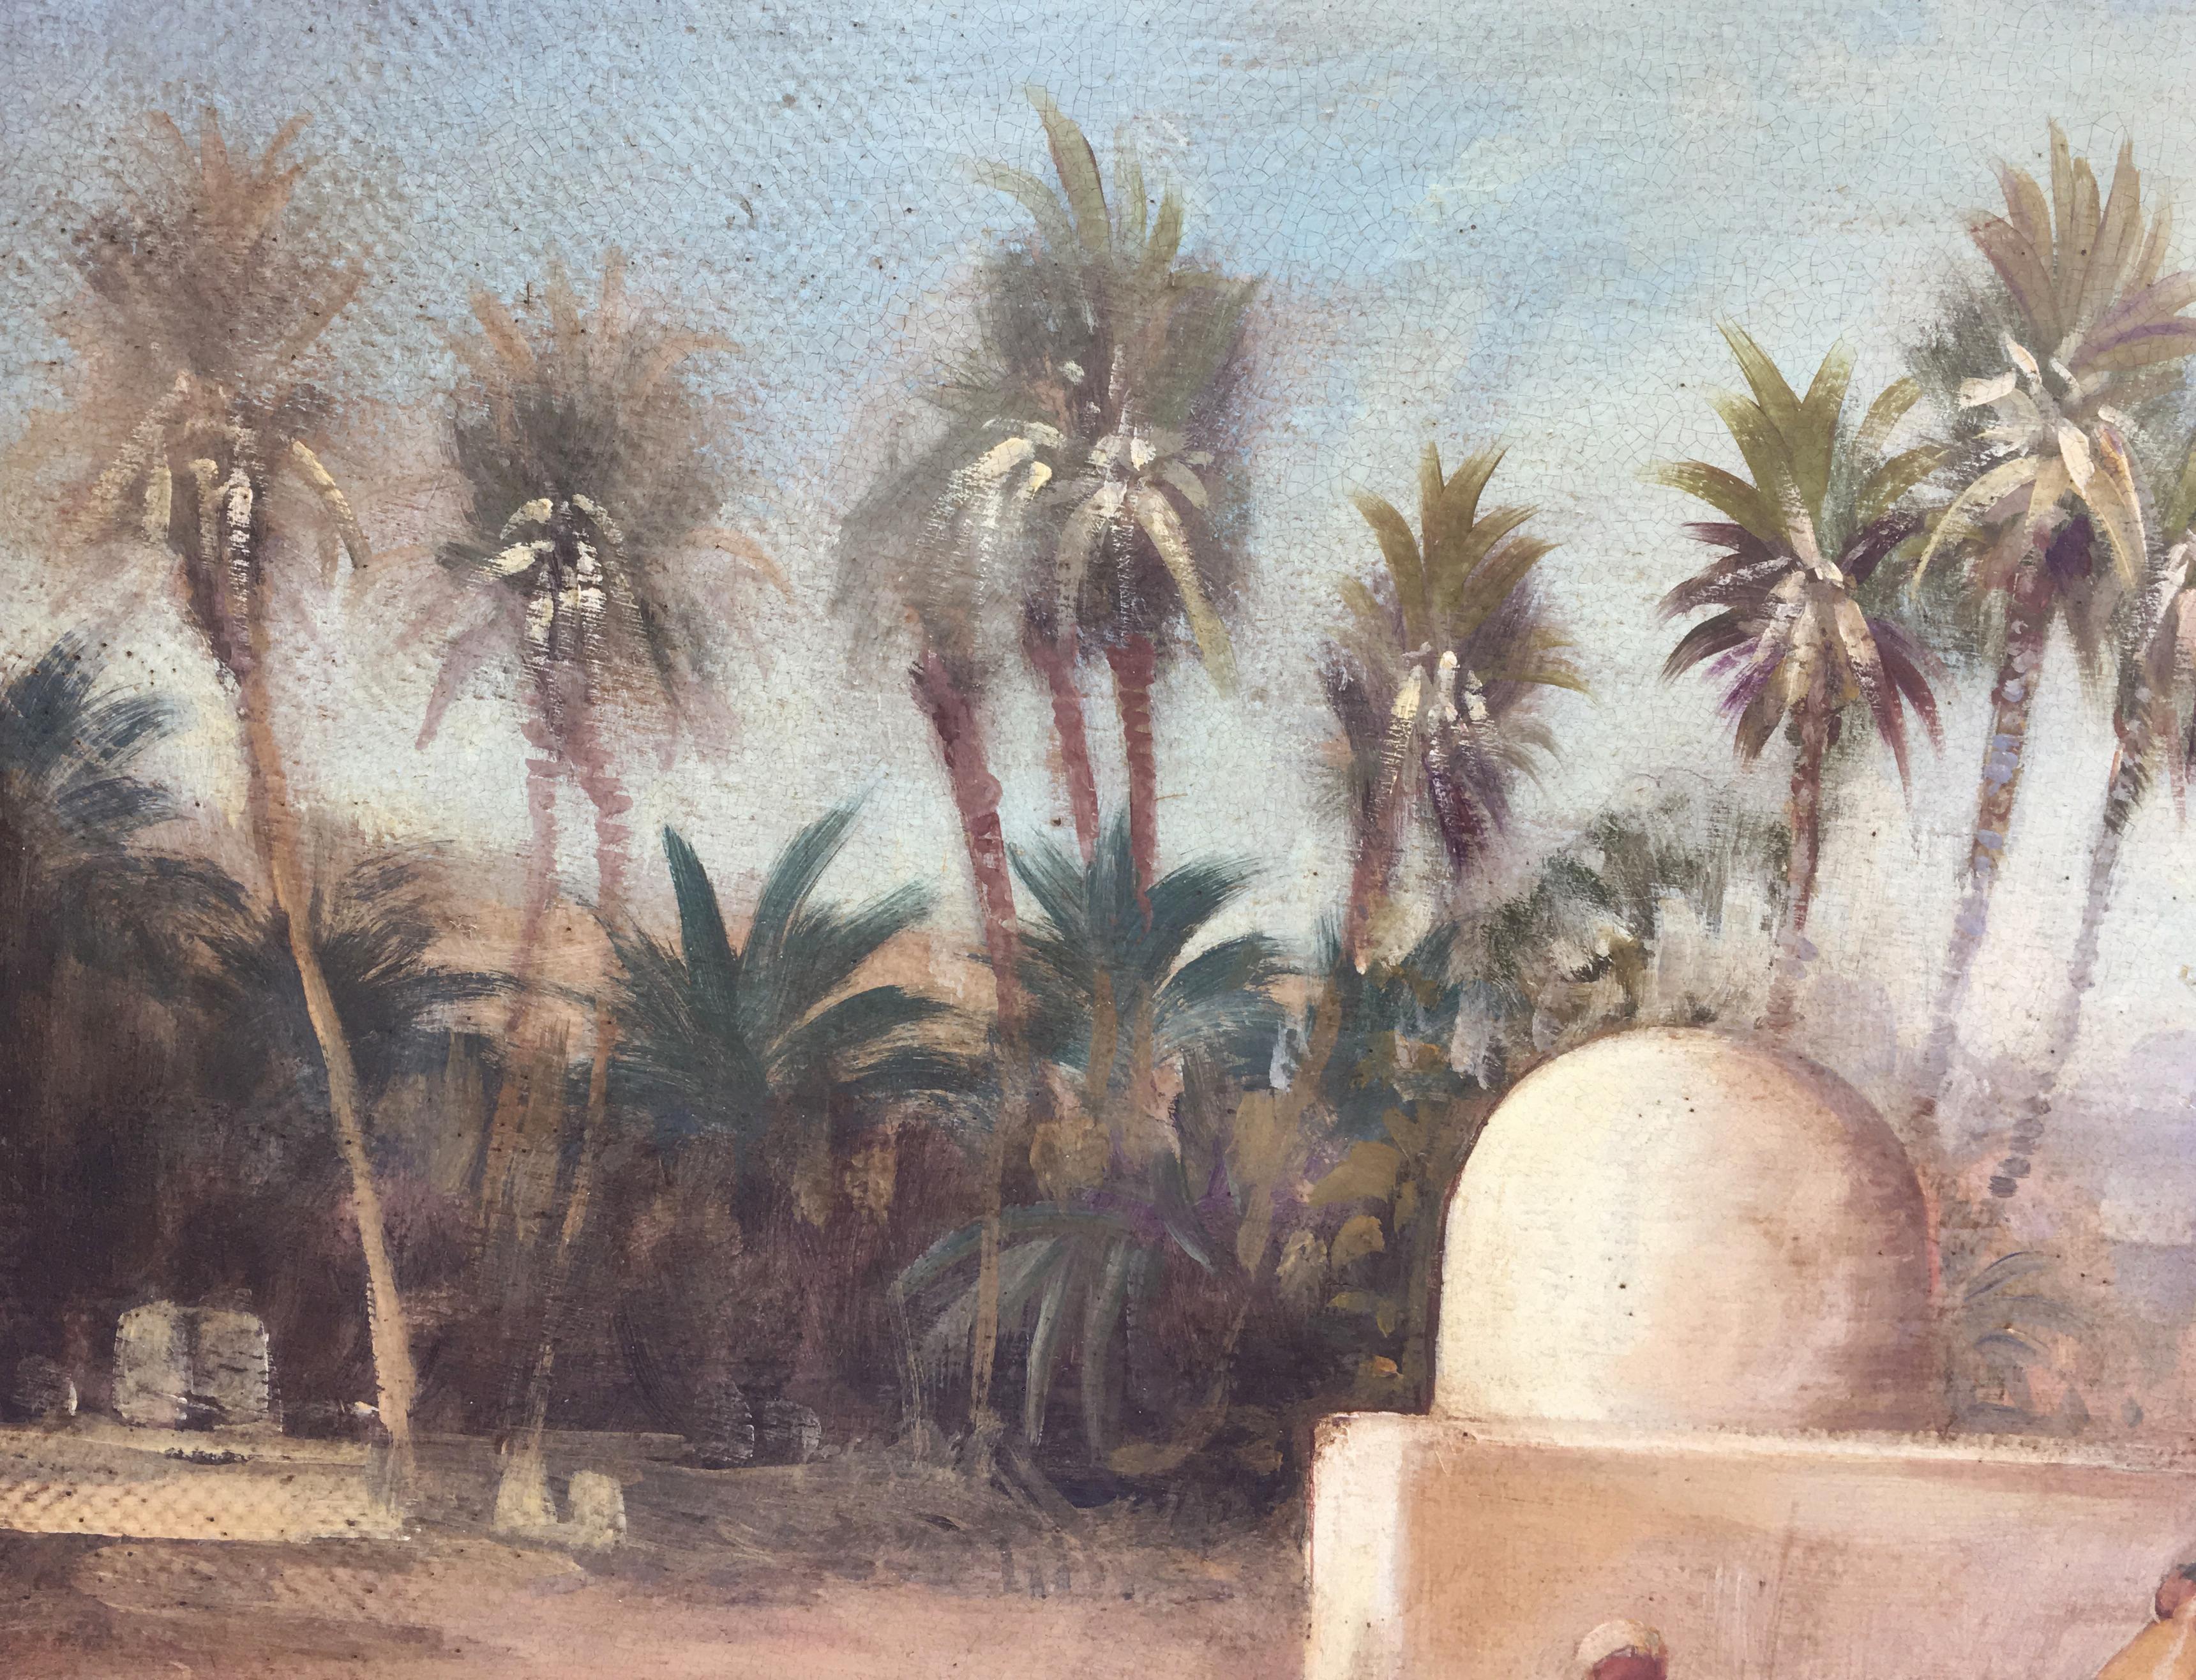 Arabian landscape - Francoise Vigneron Italia 2003 - Oil on canvas cm.40x80.
Frame available on request from our workshop.
In this beautiful oil on canvas Francoise Vigneron was inspired by the oriental and Arab landscapes of the French painter